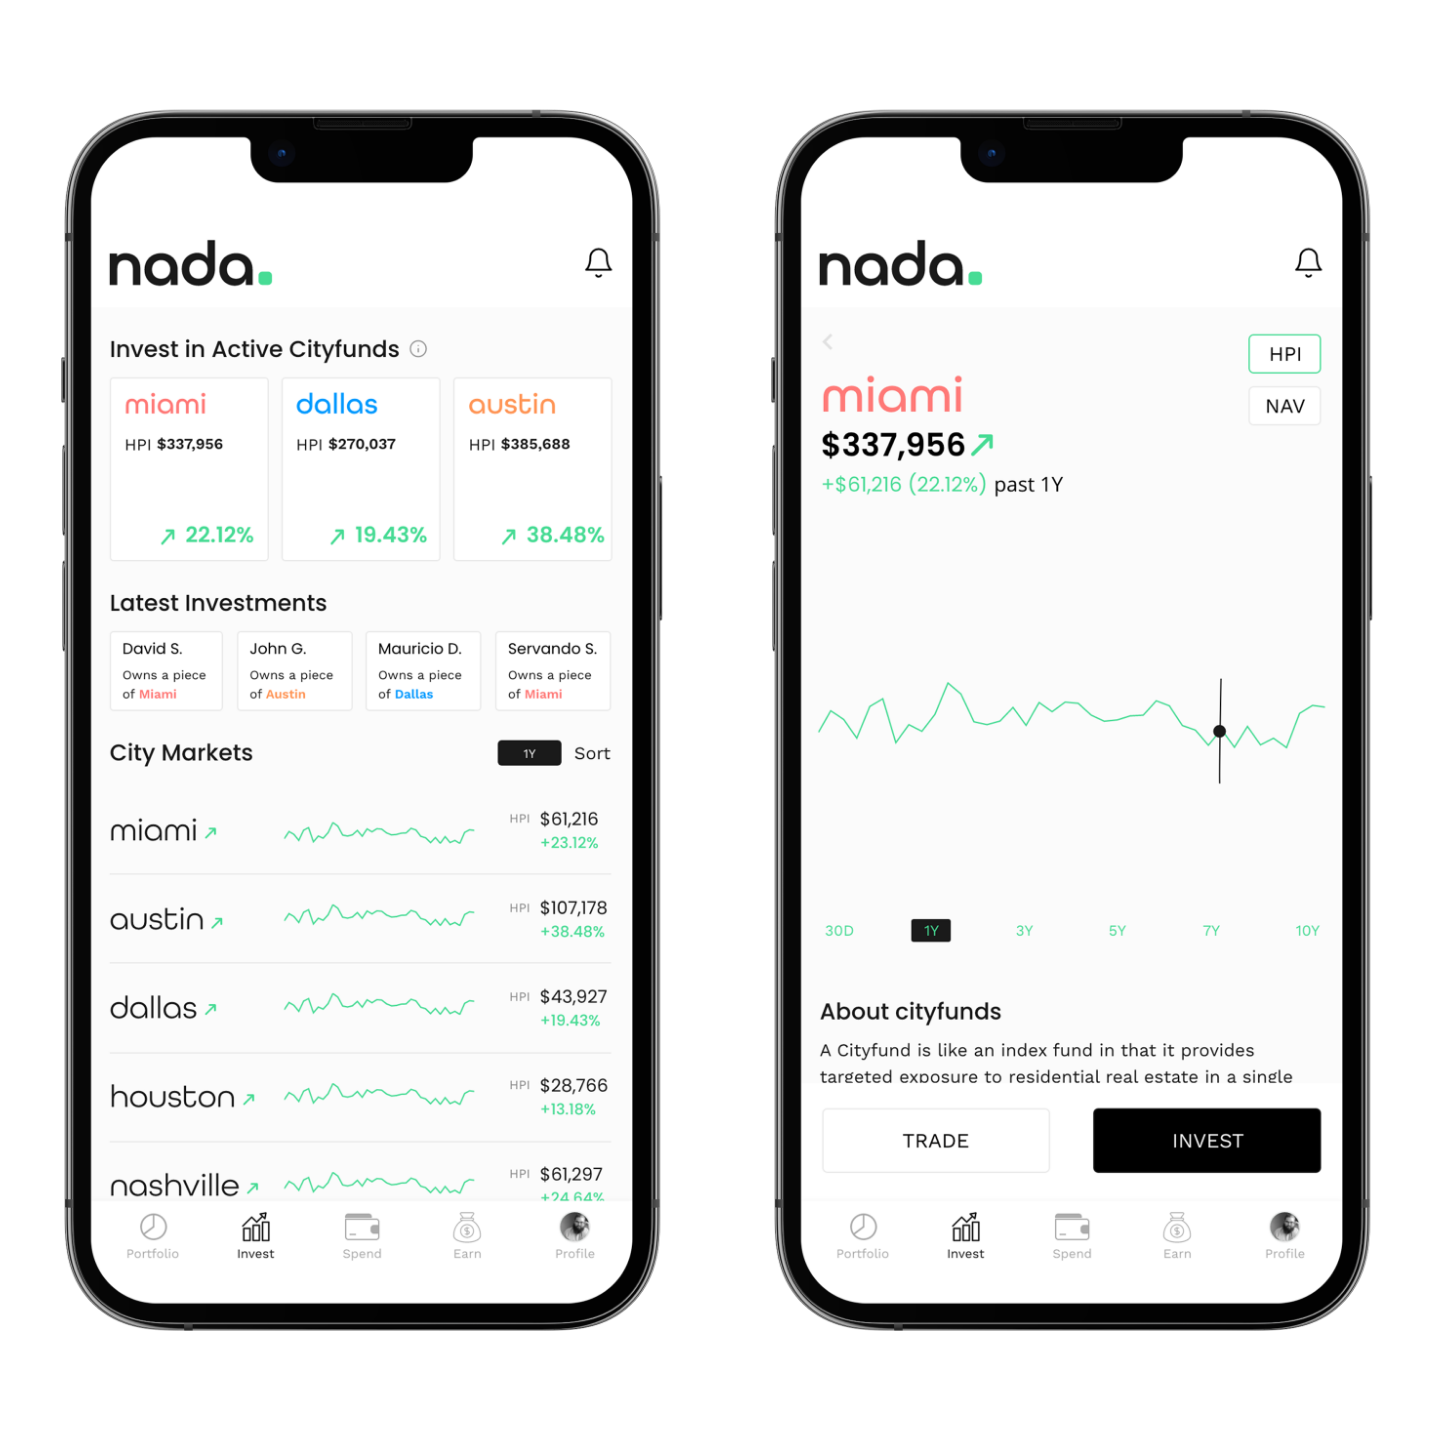 Images of Nada's not-yet-released mobile investment app